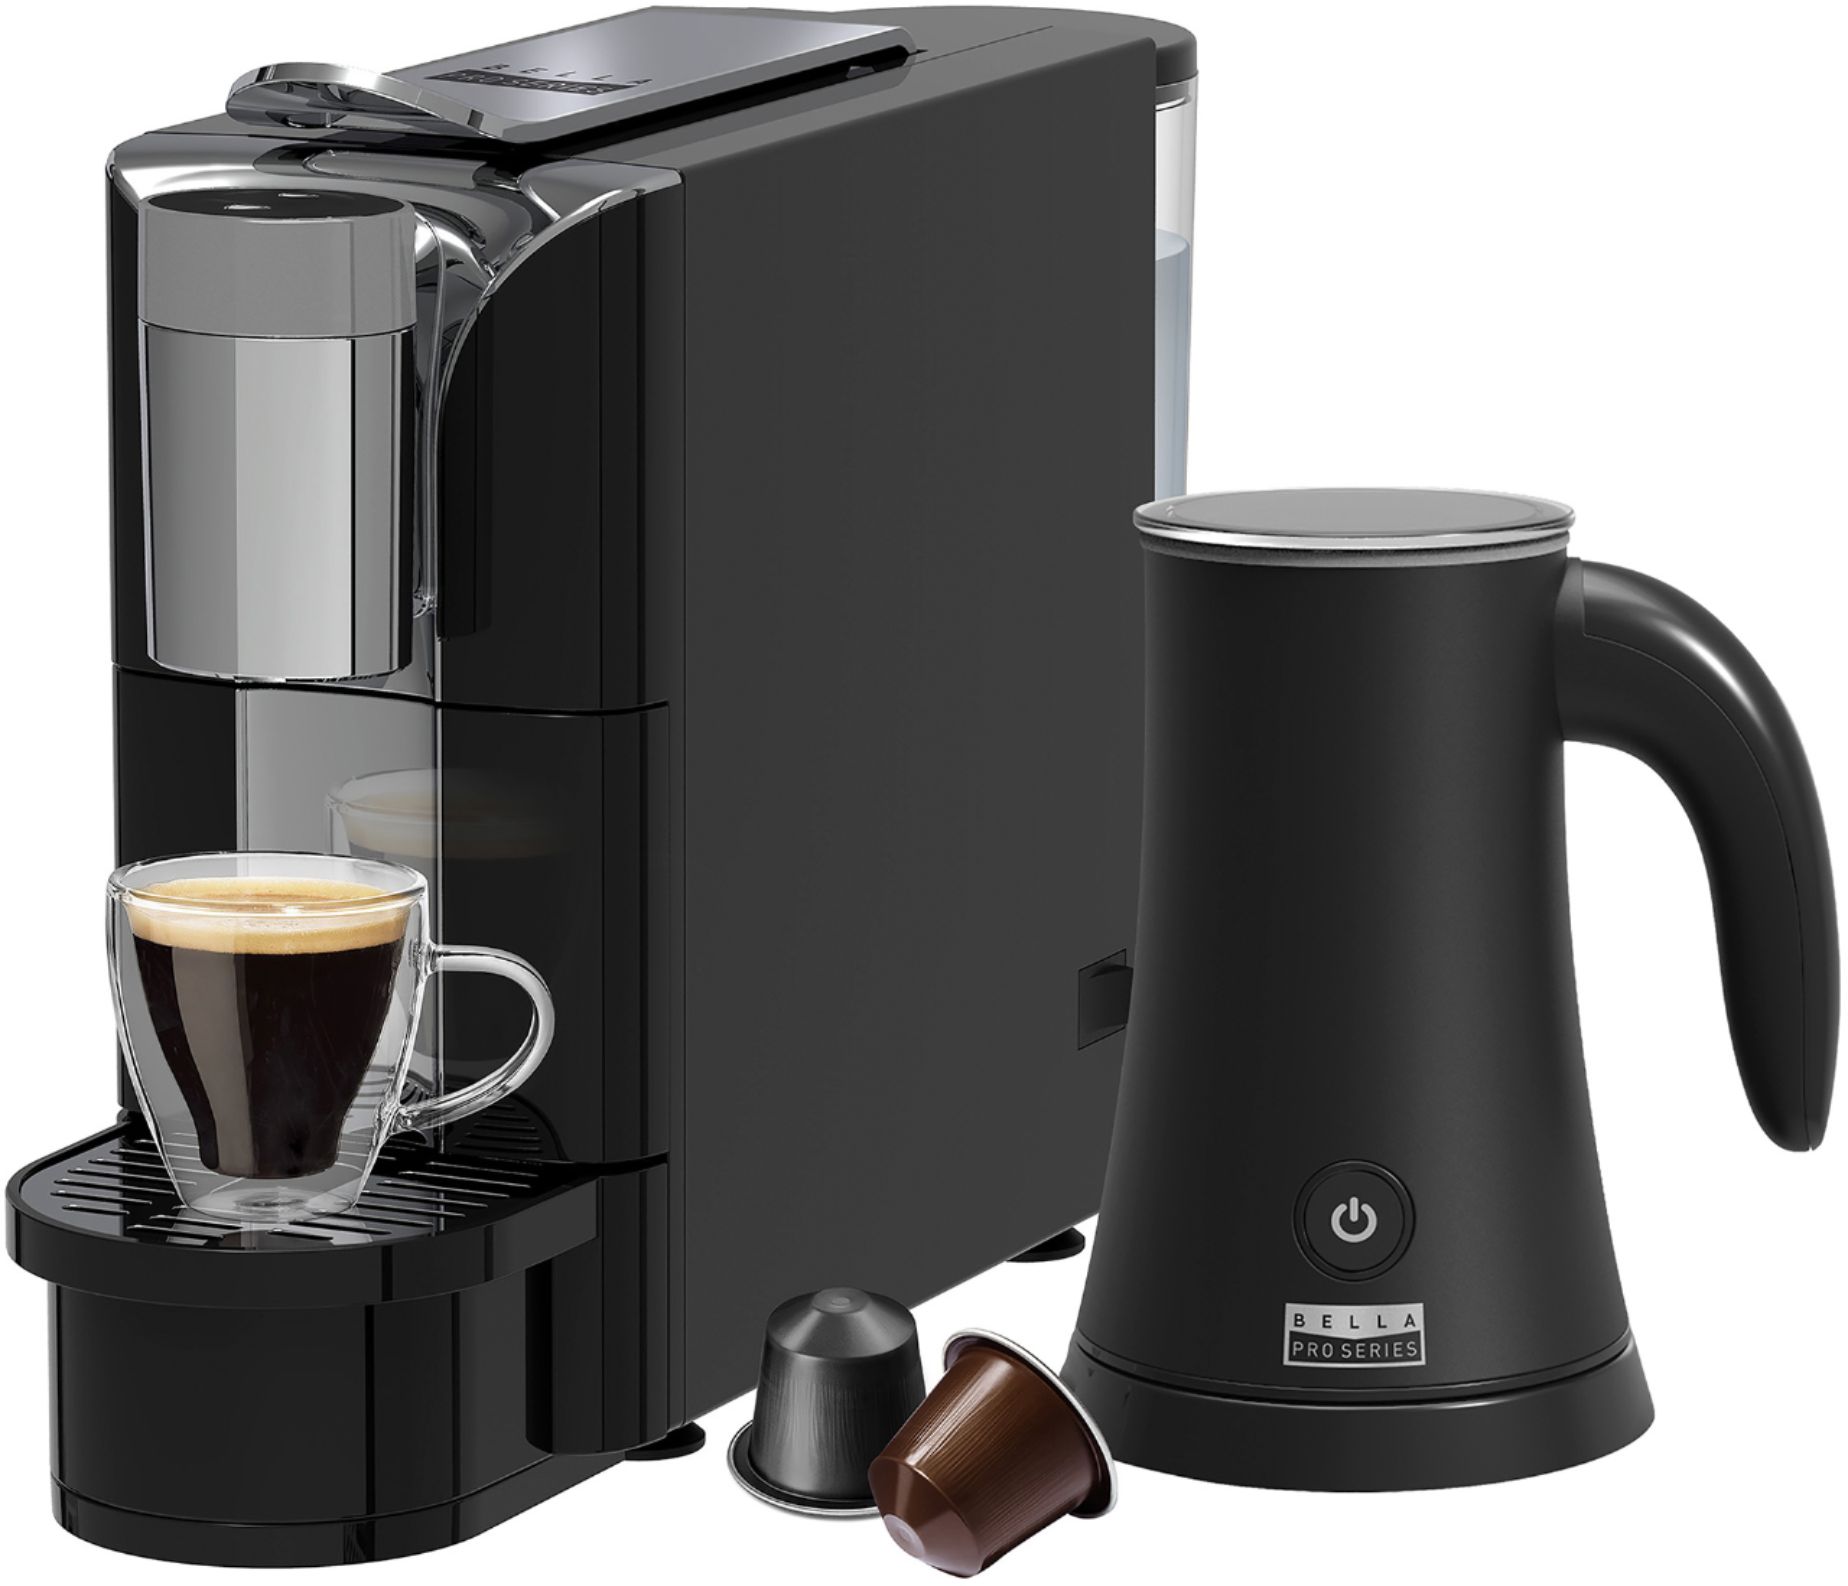 Bella Pro Series Capsule Coffee Maker and Milk Frother Black 90113 - $89.99